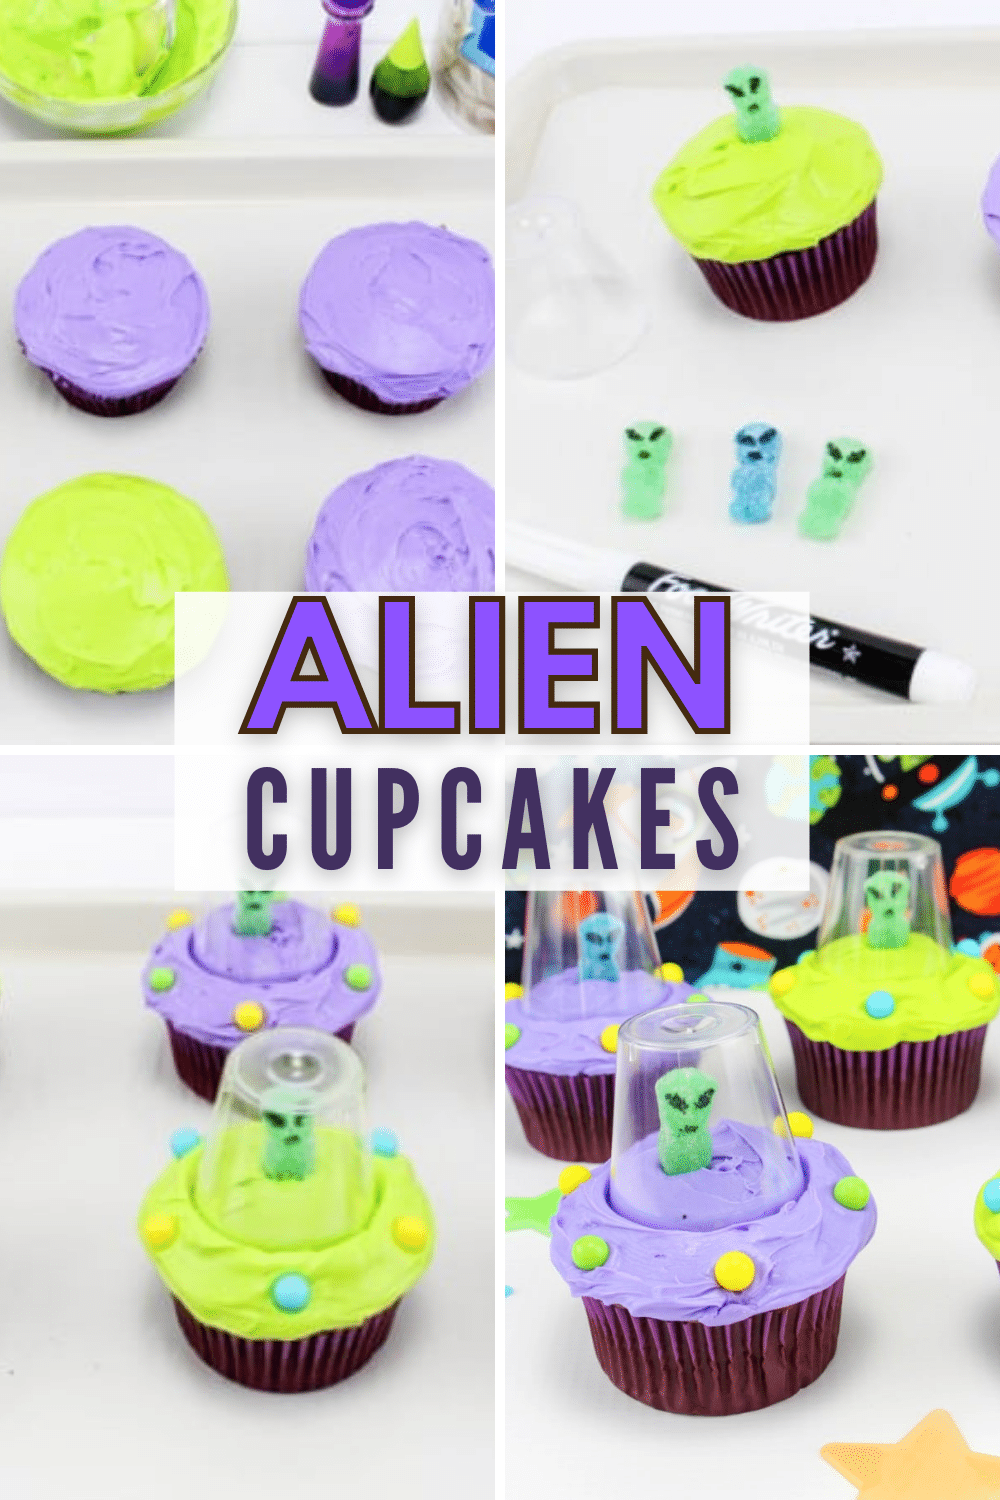 These fun alien cupcakes are just as easy to make as they are adorable! You don't have to be a professional cake decorator to make these for your child. #funfoodforkids #cupcakes #aliens via @wondermomwannab